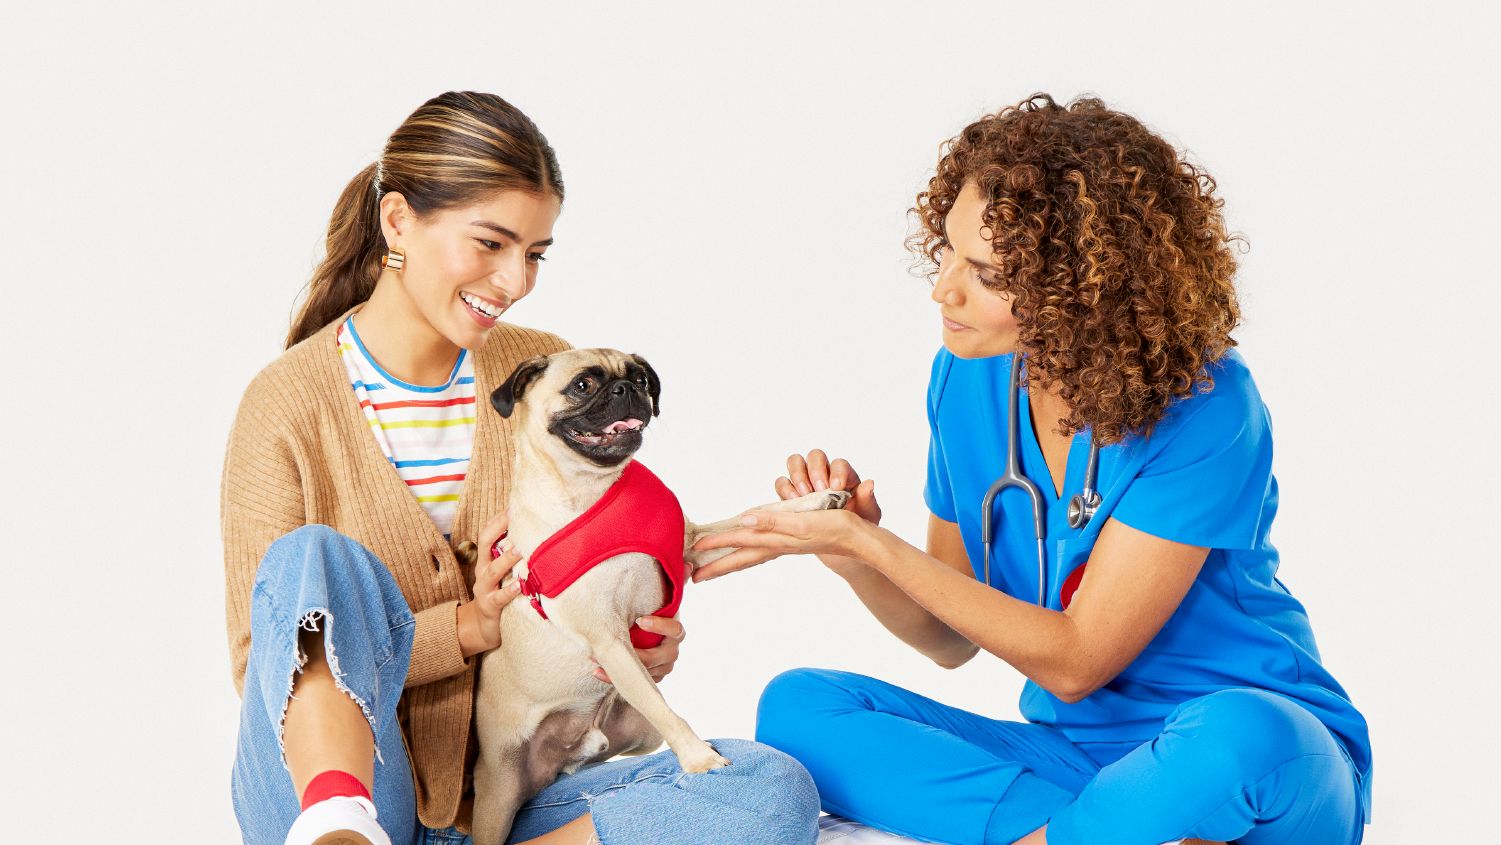 Veterinary Care - Pet Hospital - Dog and Cat Vets | PetSmart Services